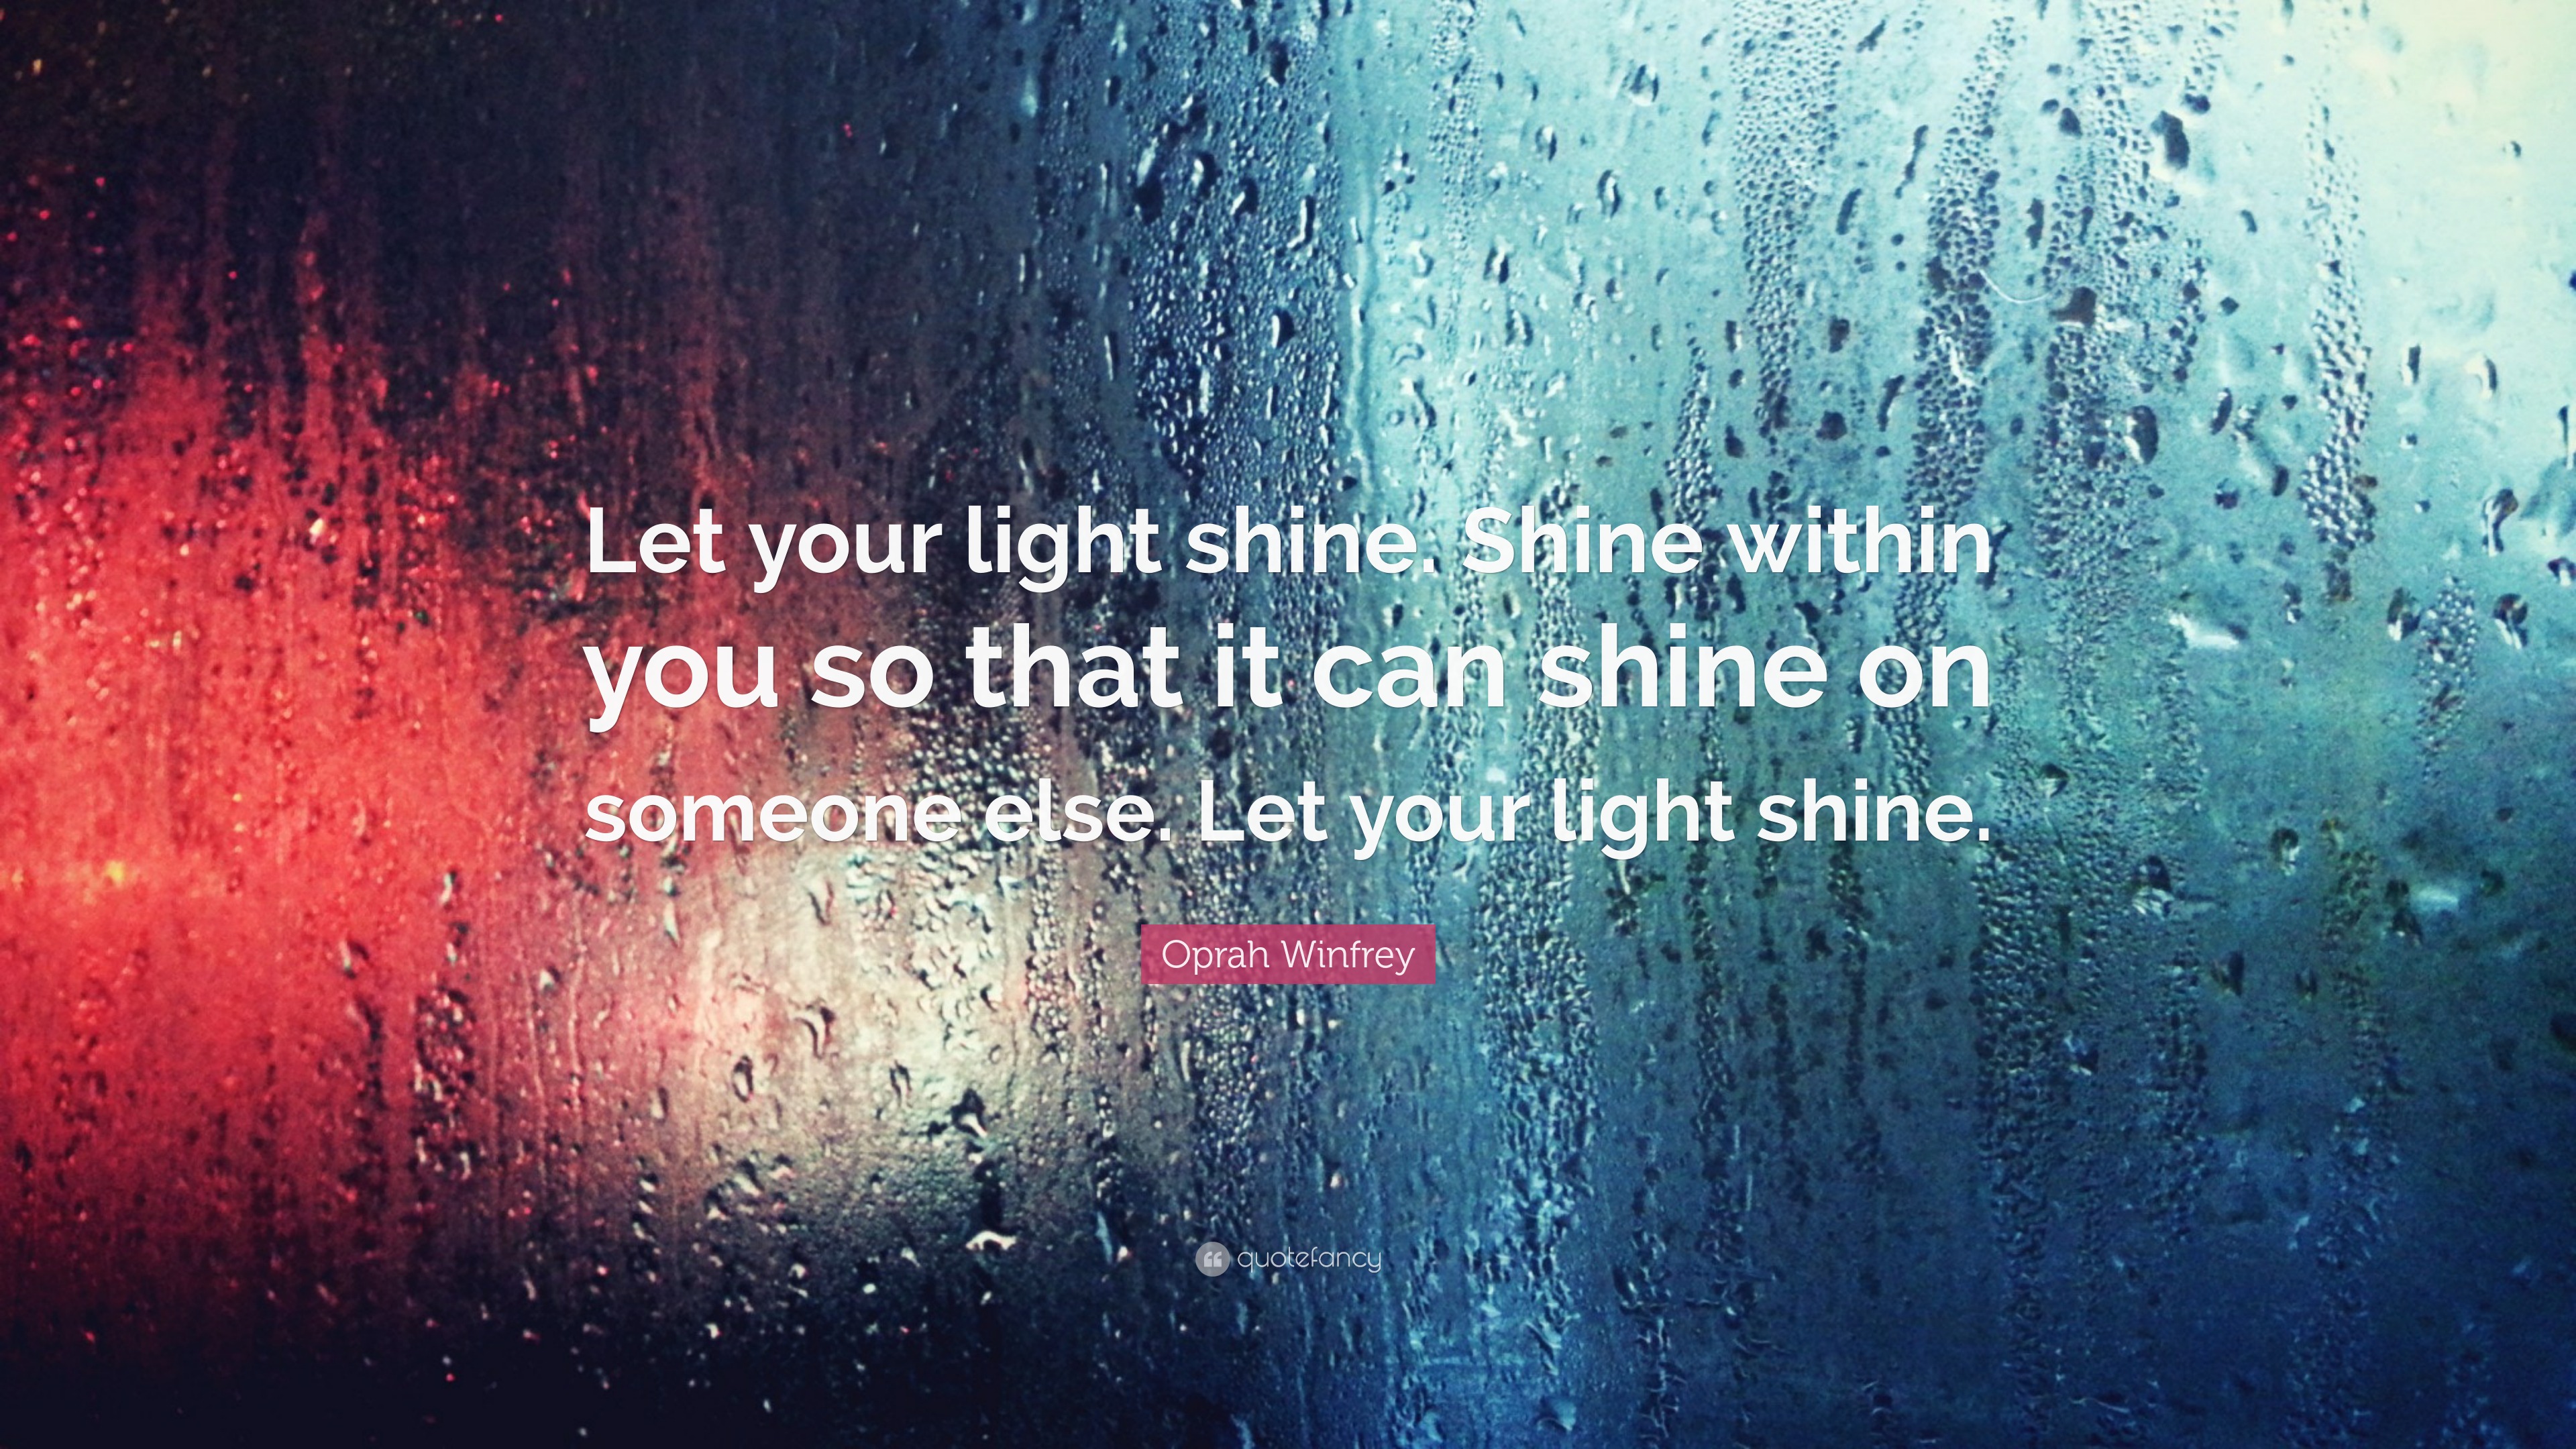 Oprah Winfrey Quote: “Let your light shine. Shine within you so that it can  shine on